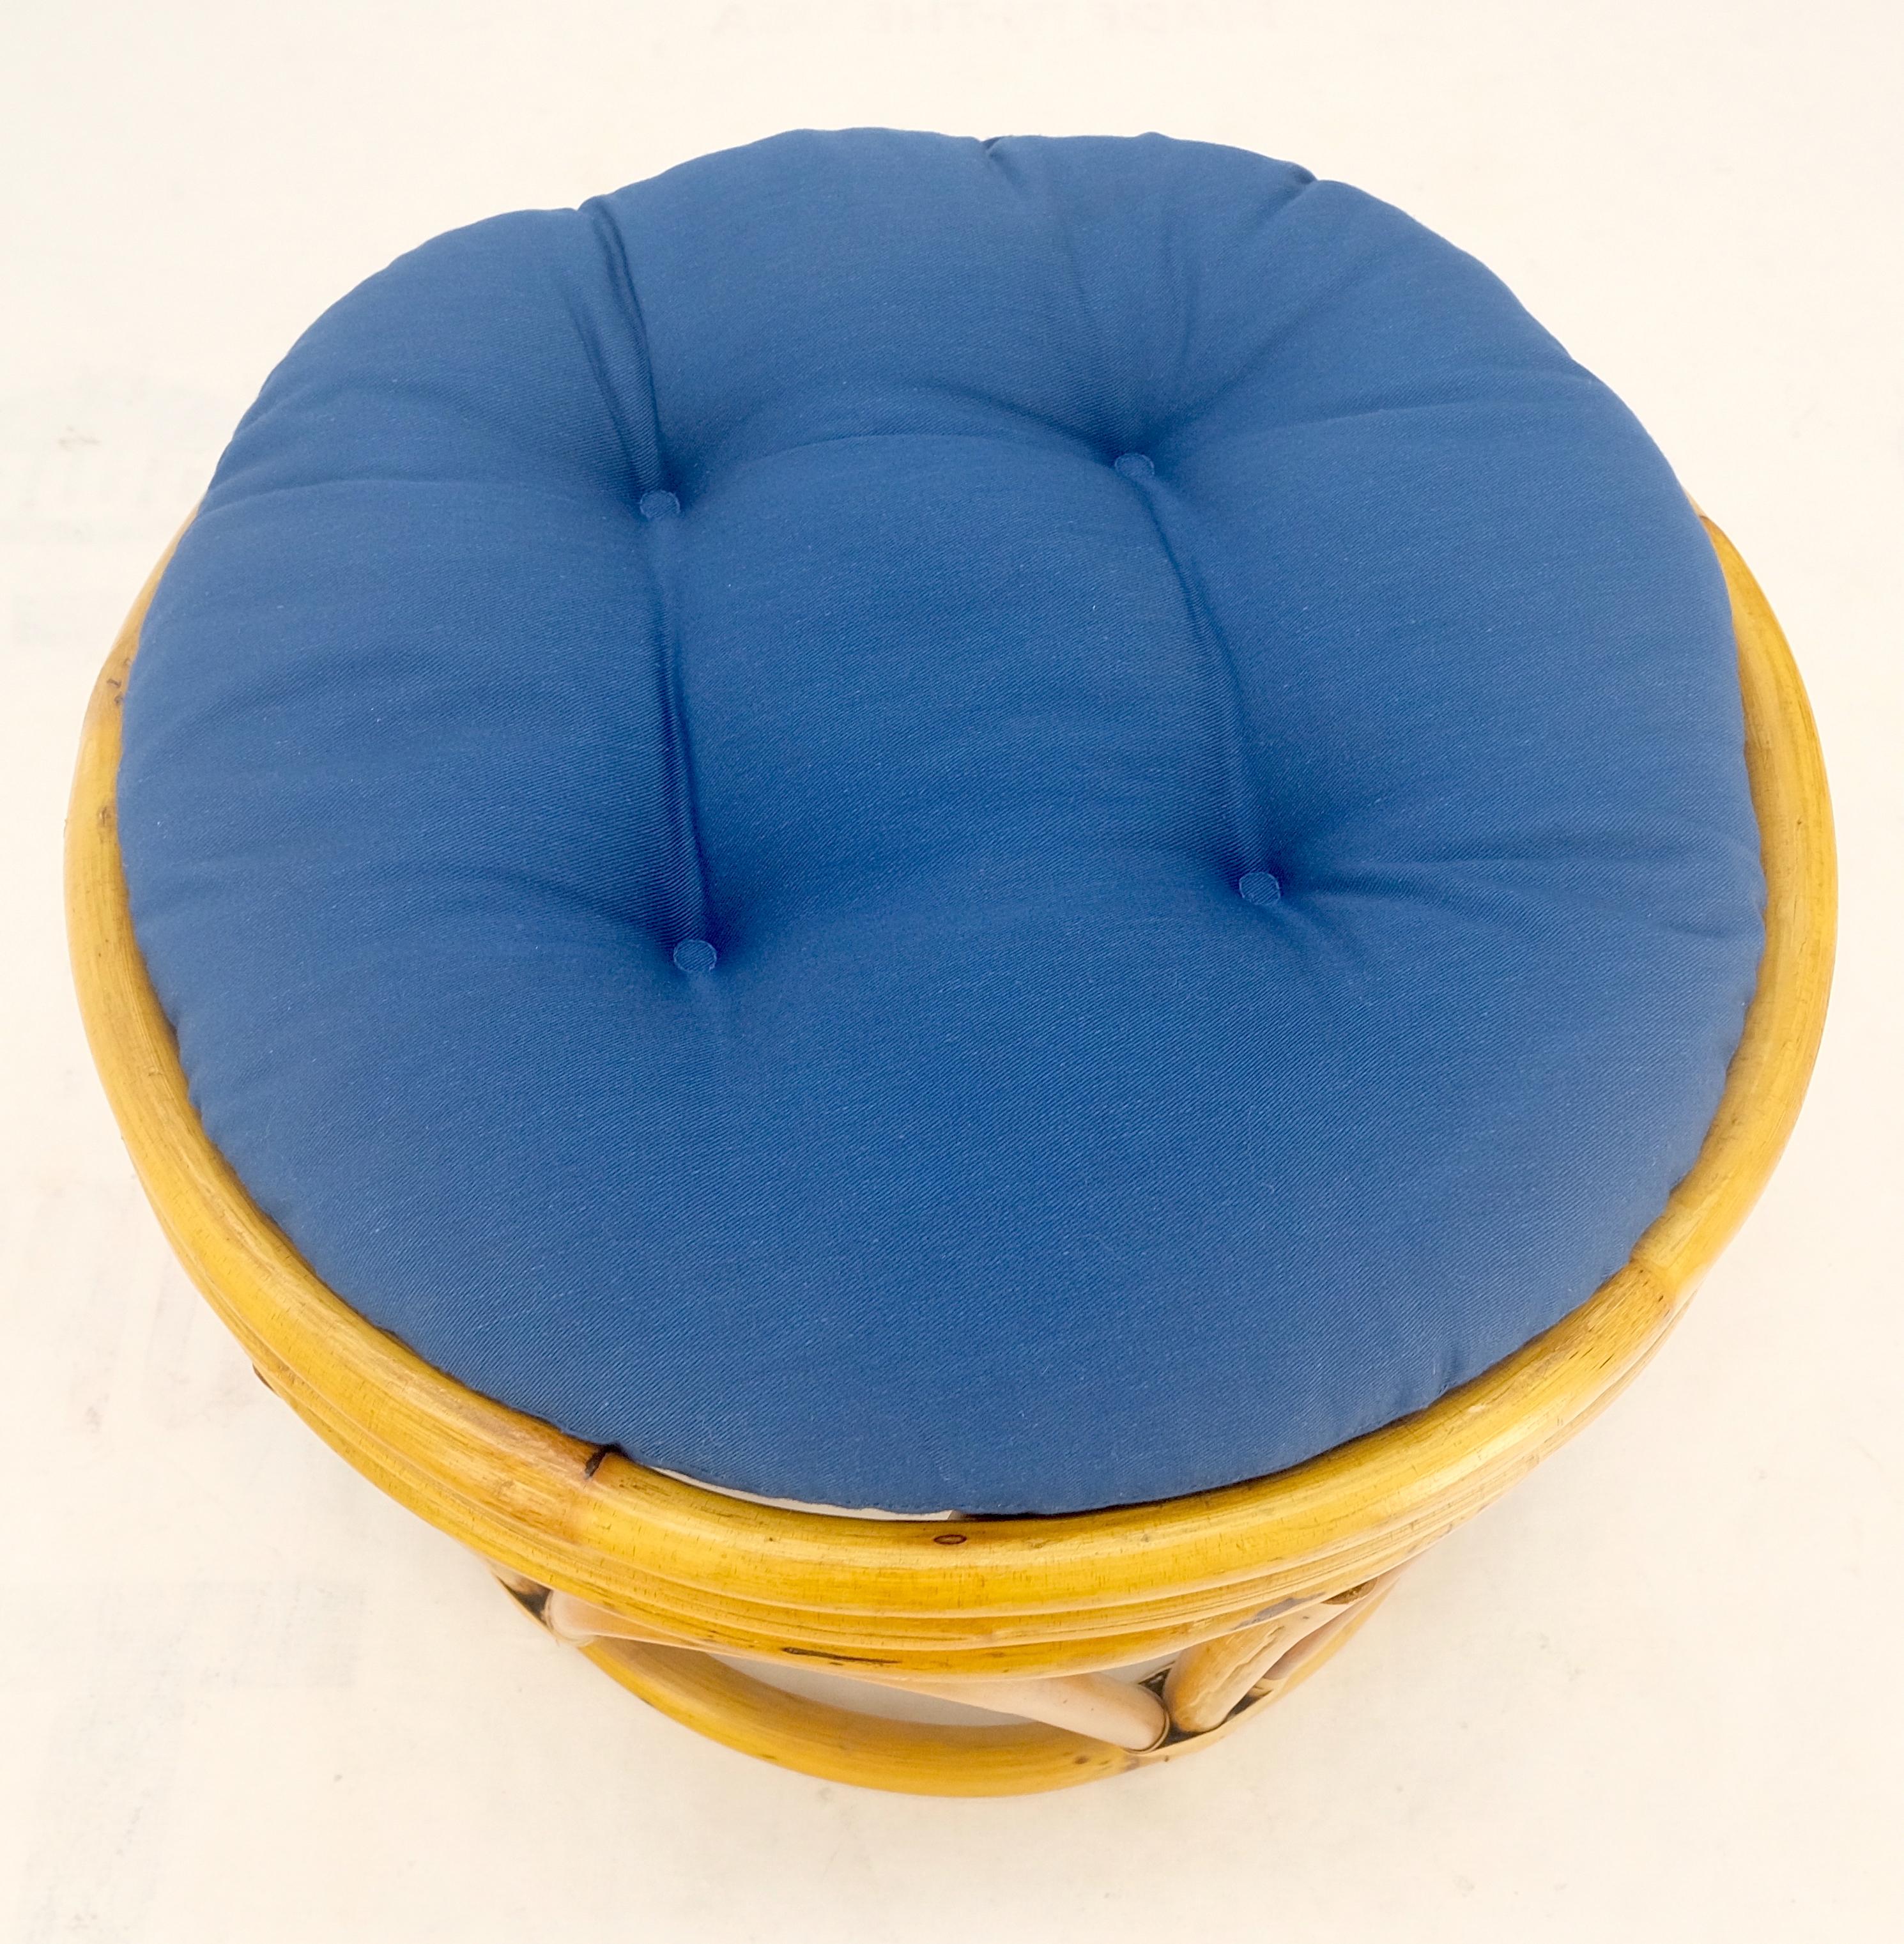 Mid-Century Modern Round Mid Century Modern  Blue Upholstery Ottoman Foot Stool Bench Pouf MINT! For Sale